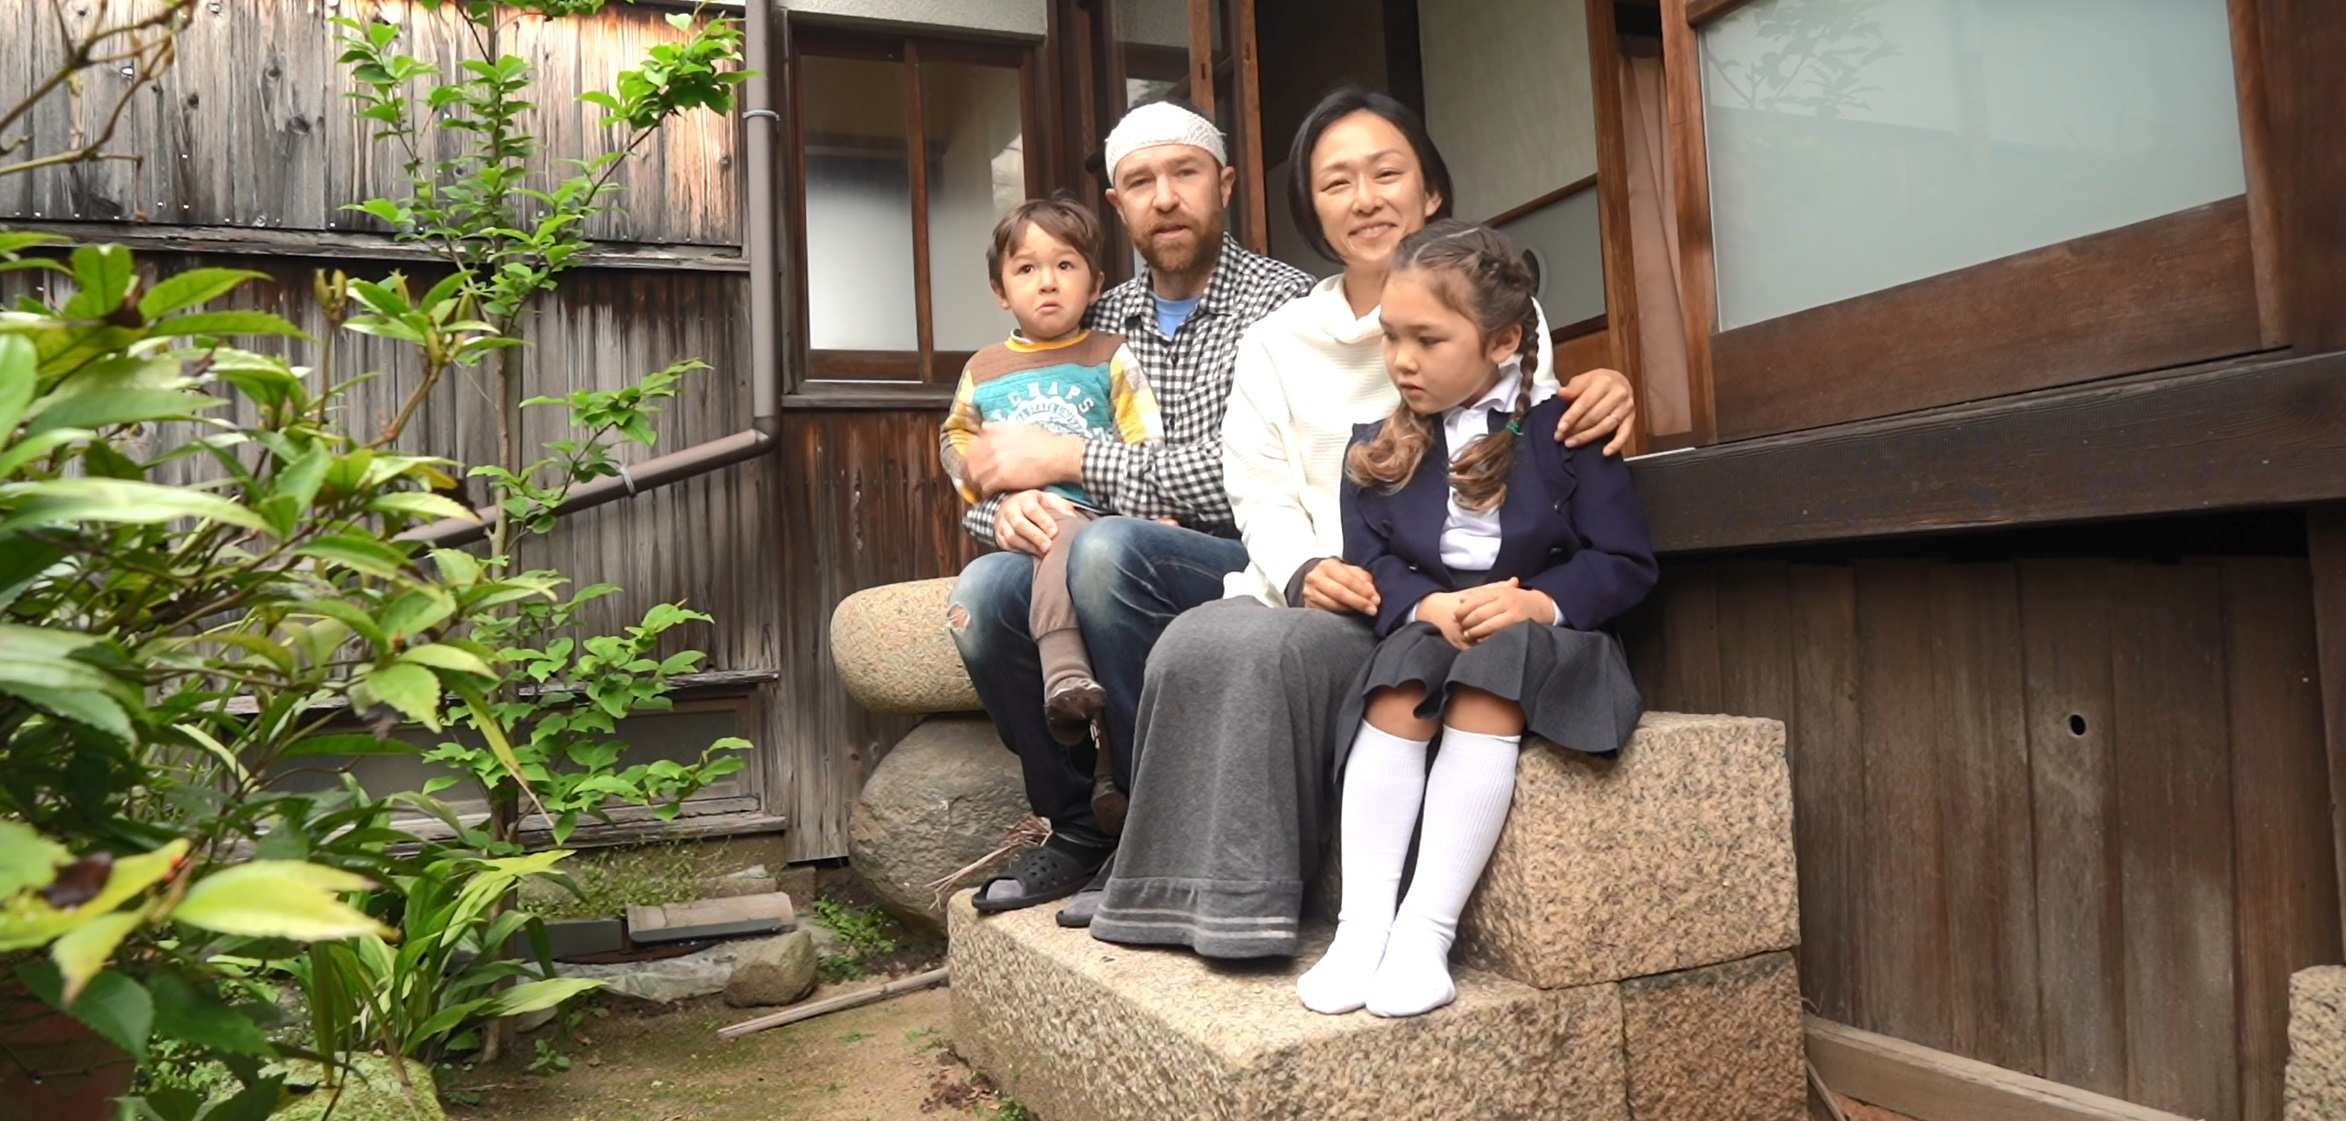 Small towns in Japan are desperate for families like us — now weve got the perfect home